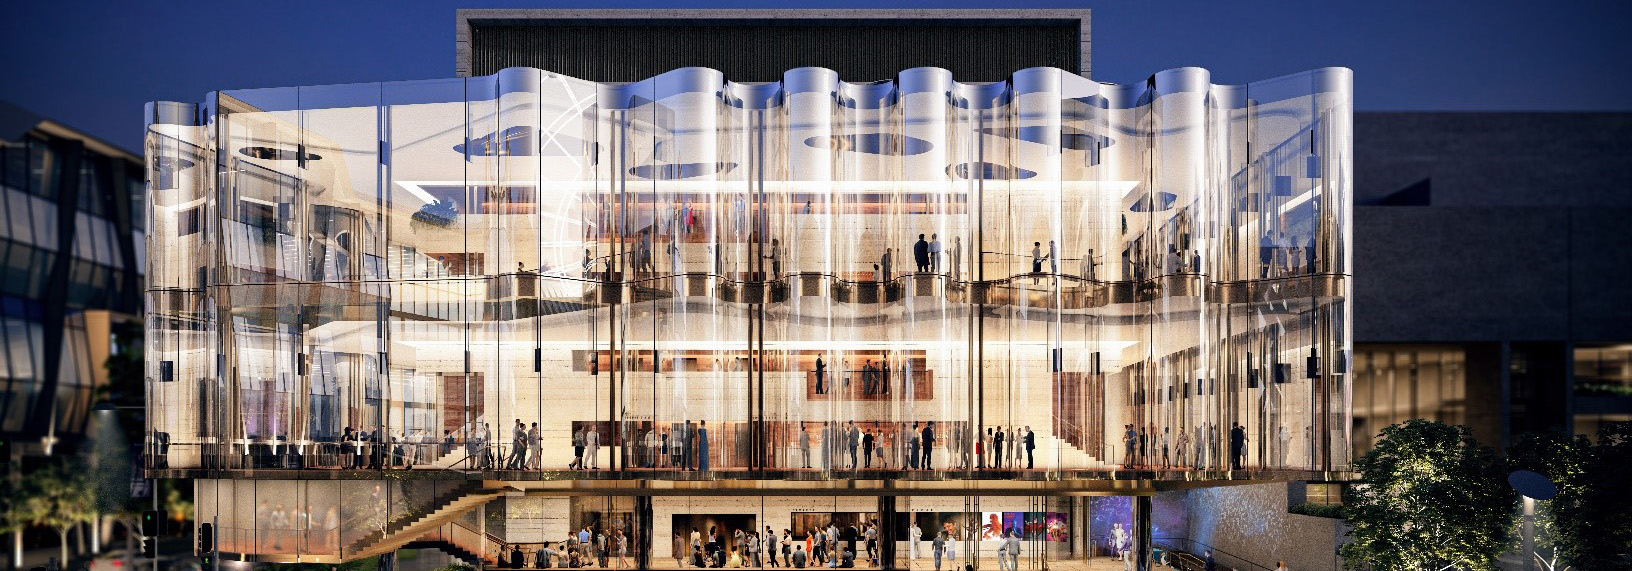 New Performing Arts Venue, Brisbane: Corrugated glass façade made by seele